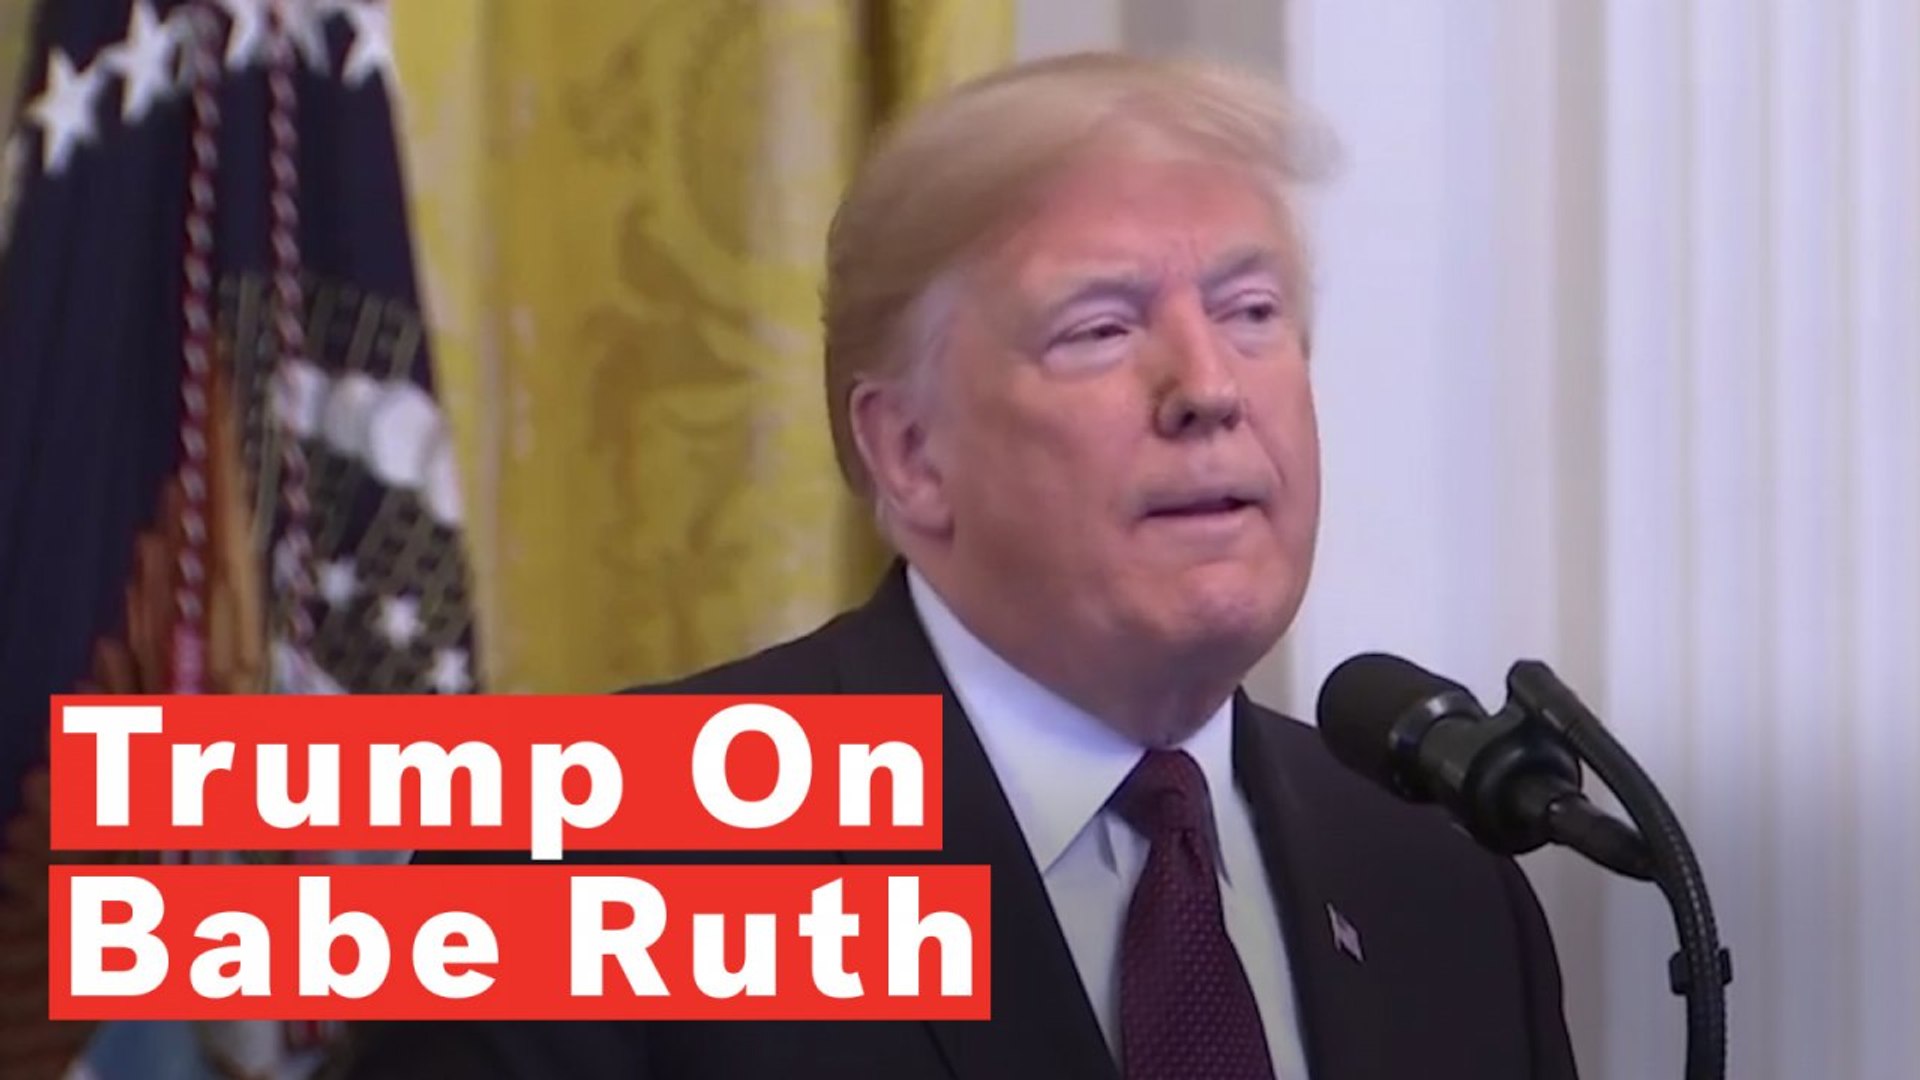 President Trump claims people 'don't know Babe Ruth was a pitcher